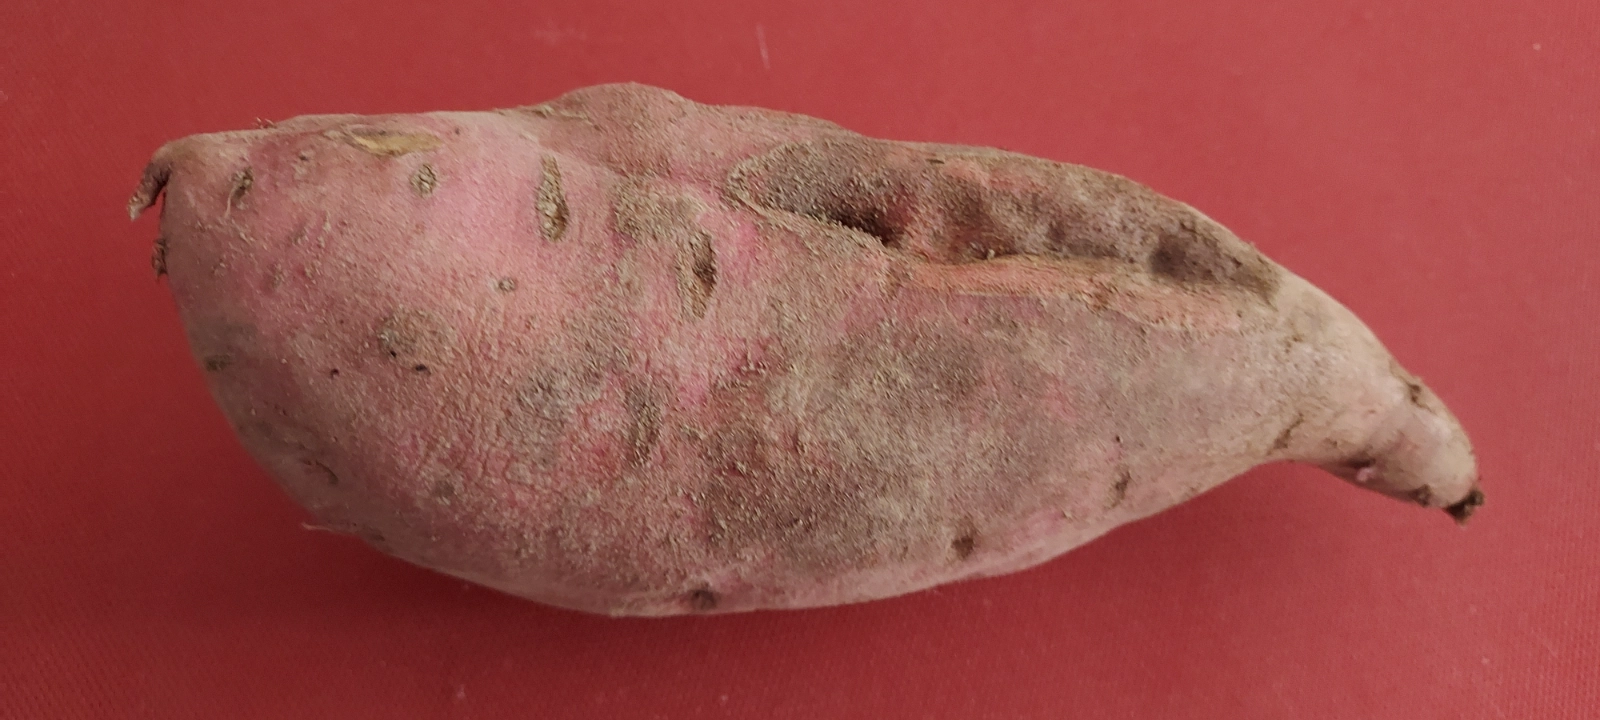 sweet-potato-ugly-reduced-price